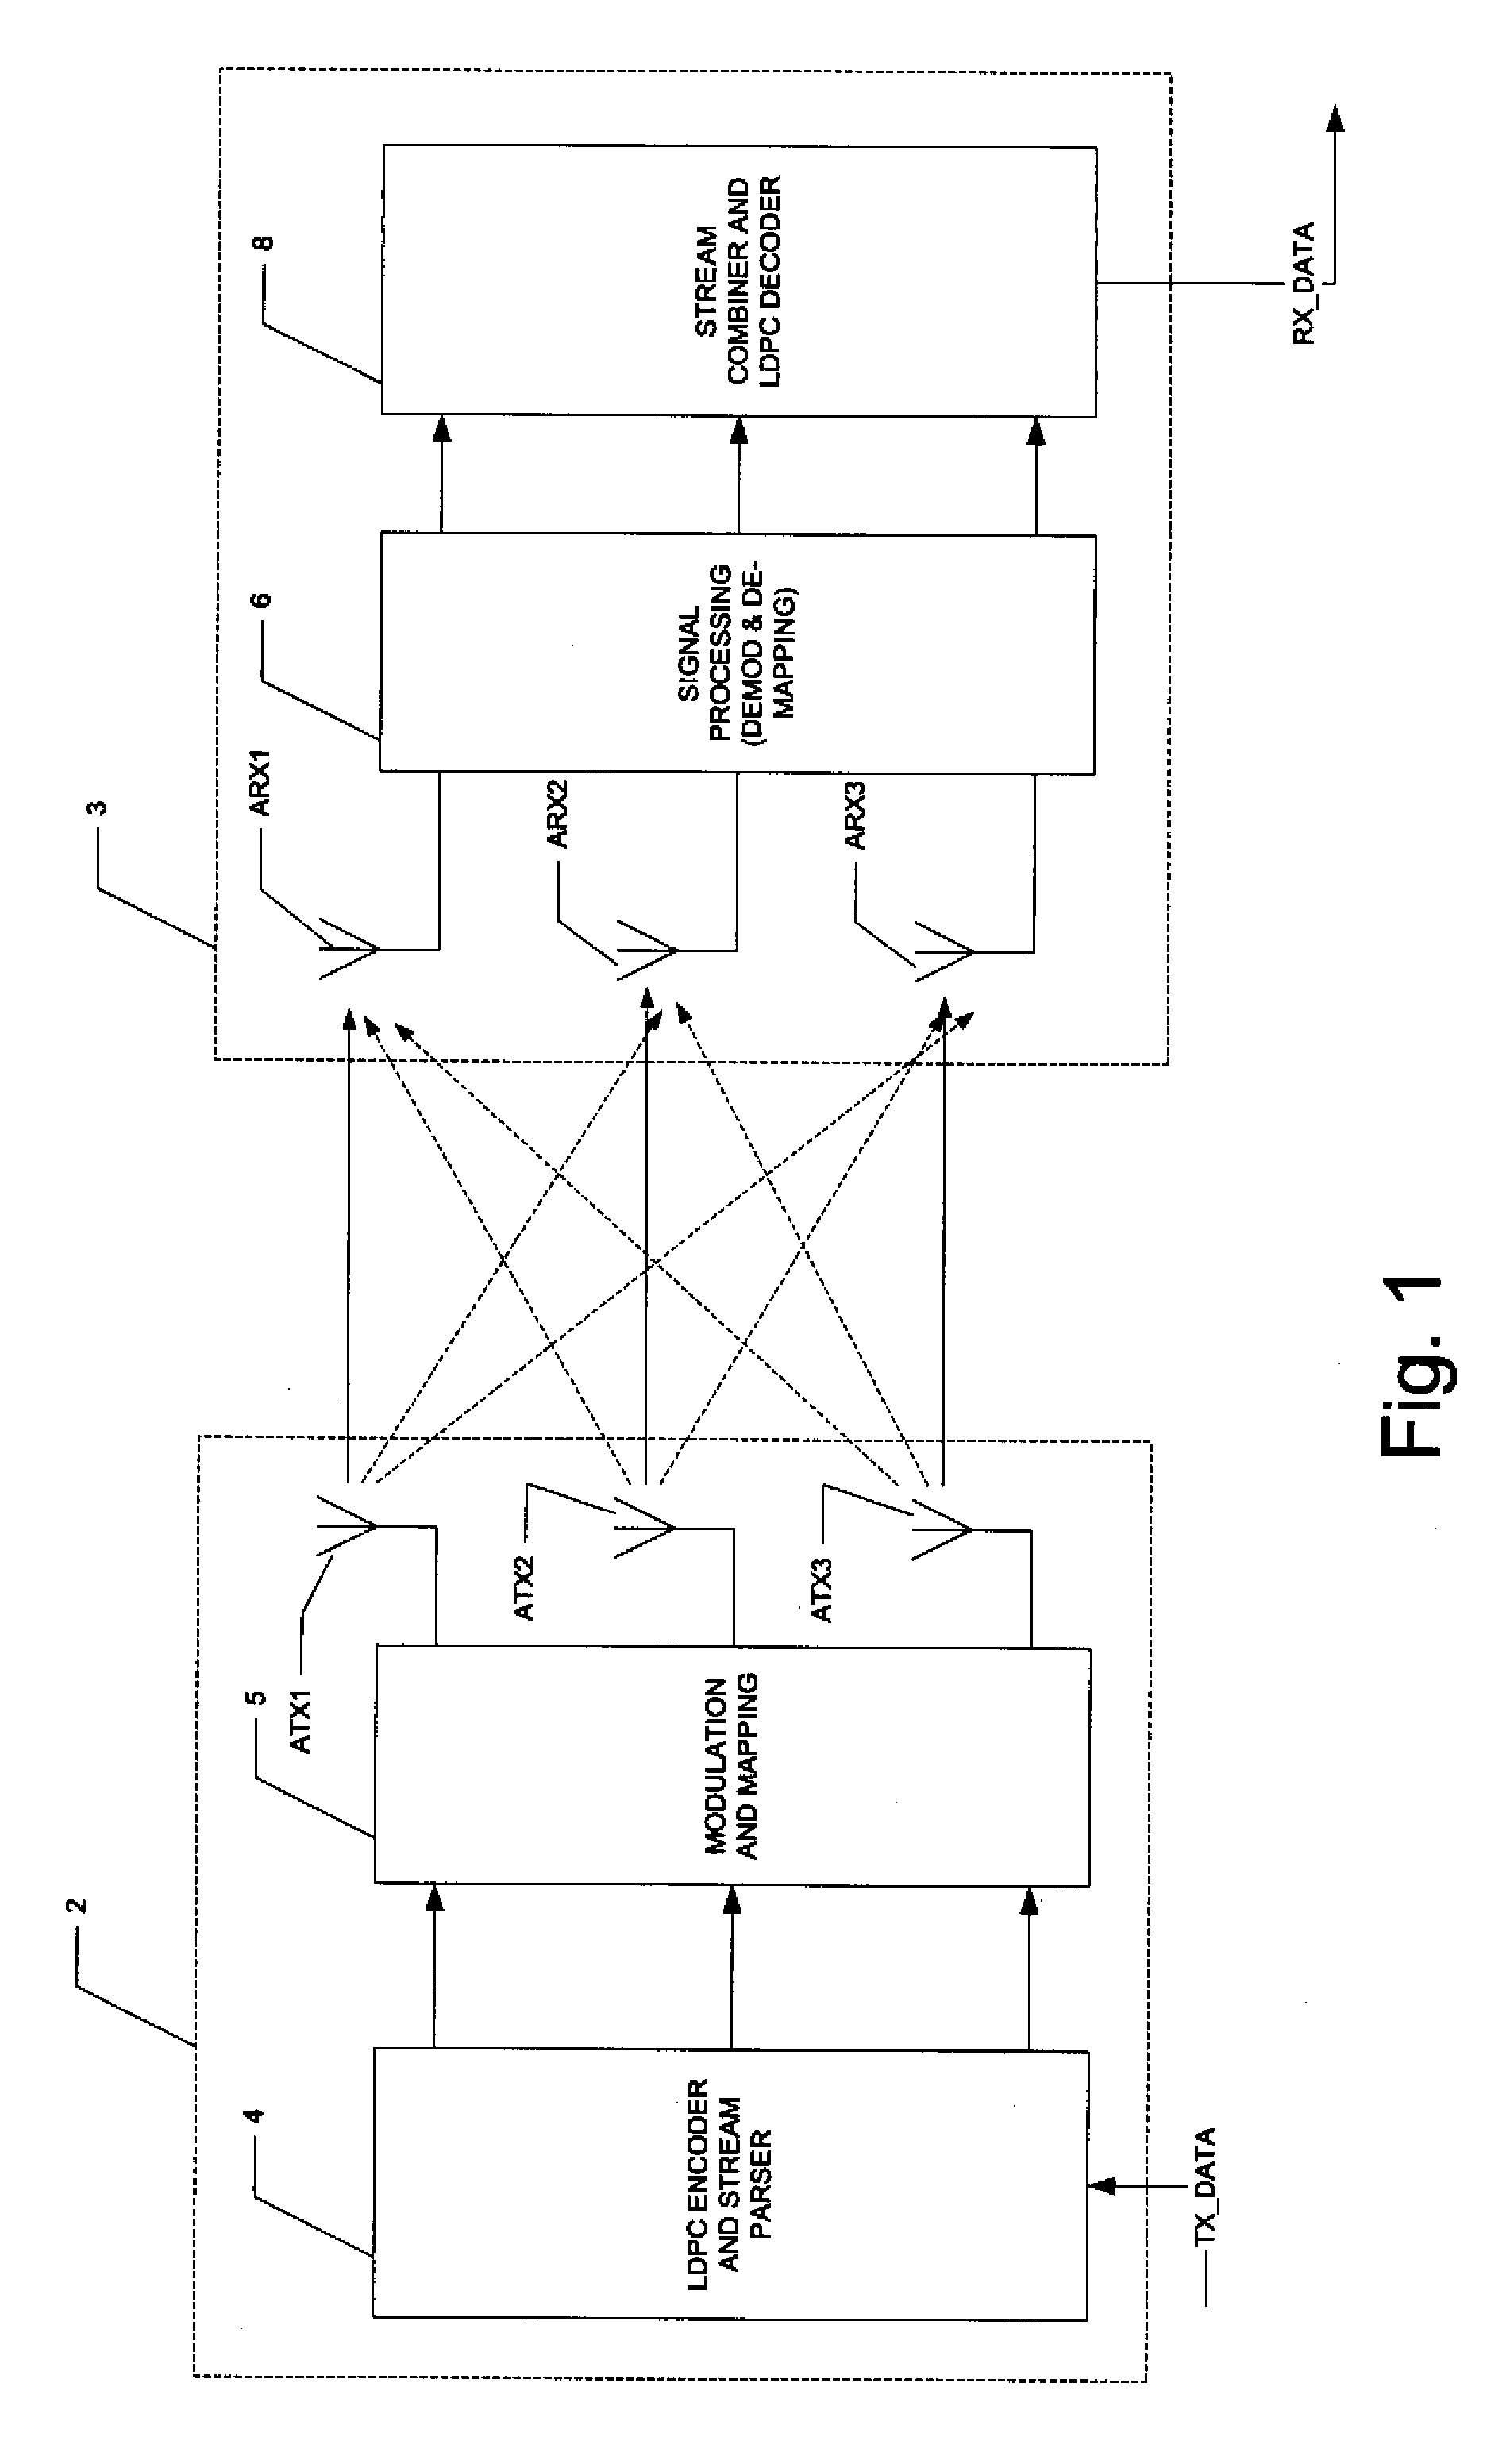 Encoding for Digital Communications in a Multiple-Input, Multiple-Output Environment